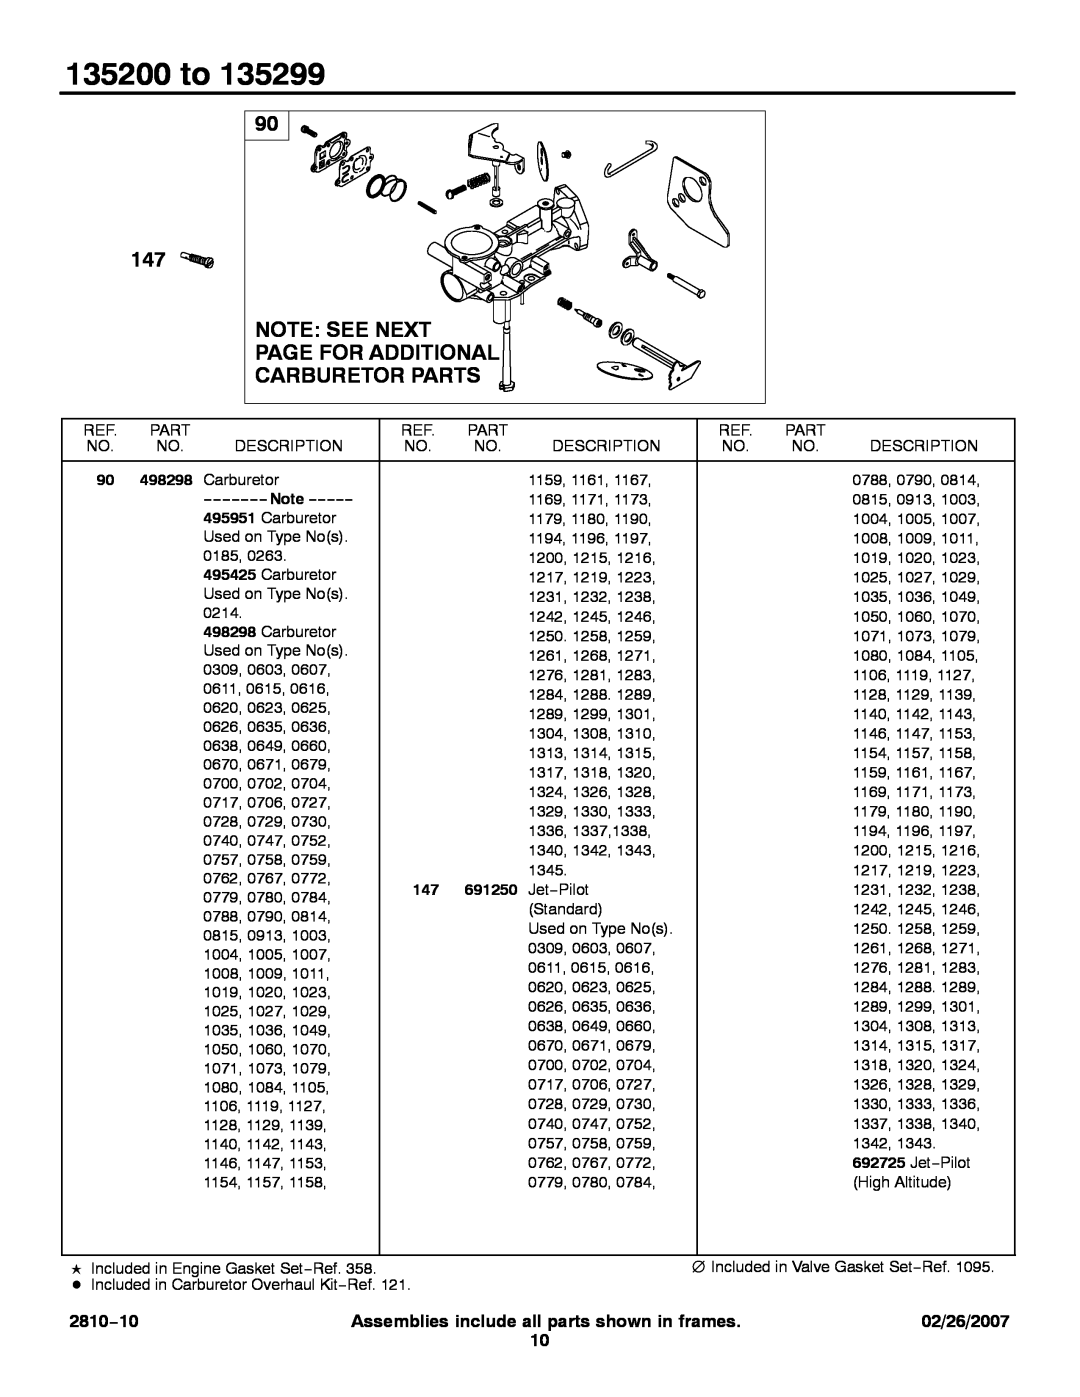 Briggs & Stratton 135200 to, Page For Additional, 2810−10, Assemblies include all parts shown in frames, 02/26/2007 